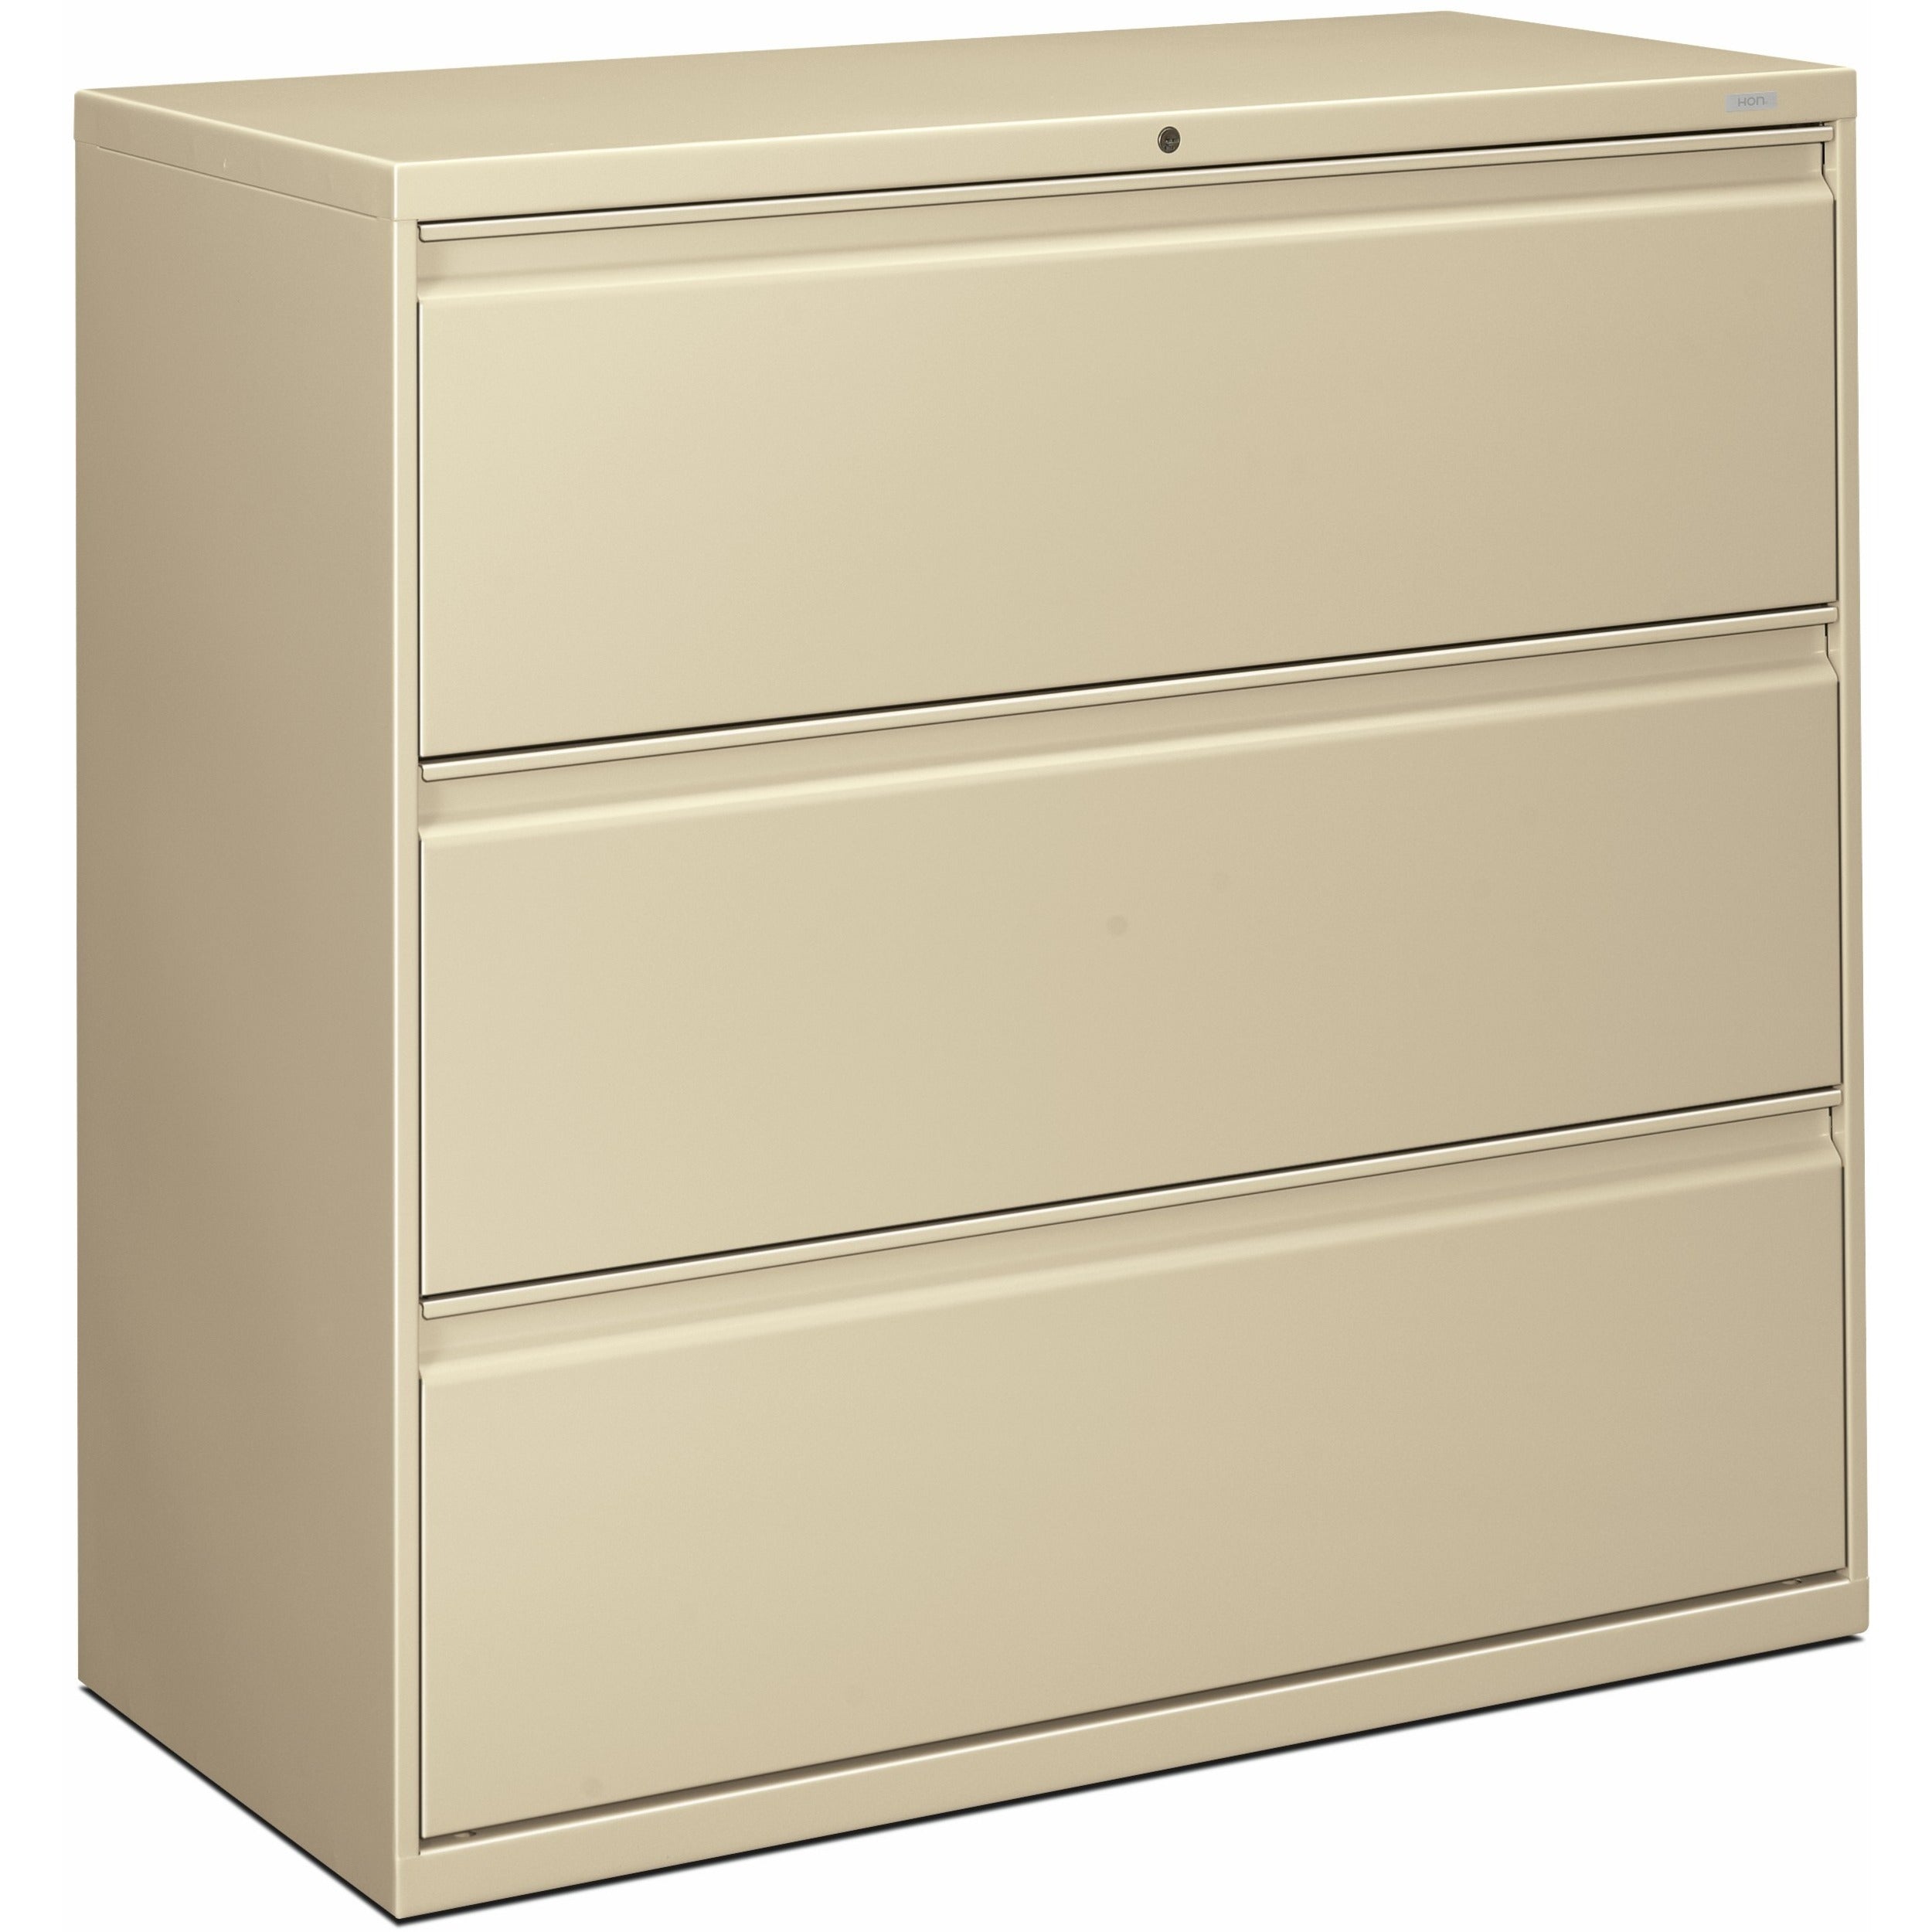 hon-brigade-800-h893-lateral-file-42-x-18409-3-drawers-finish-putty_hon893ll - 1